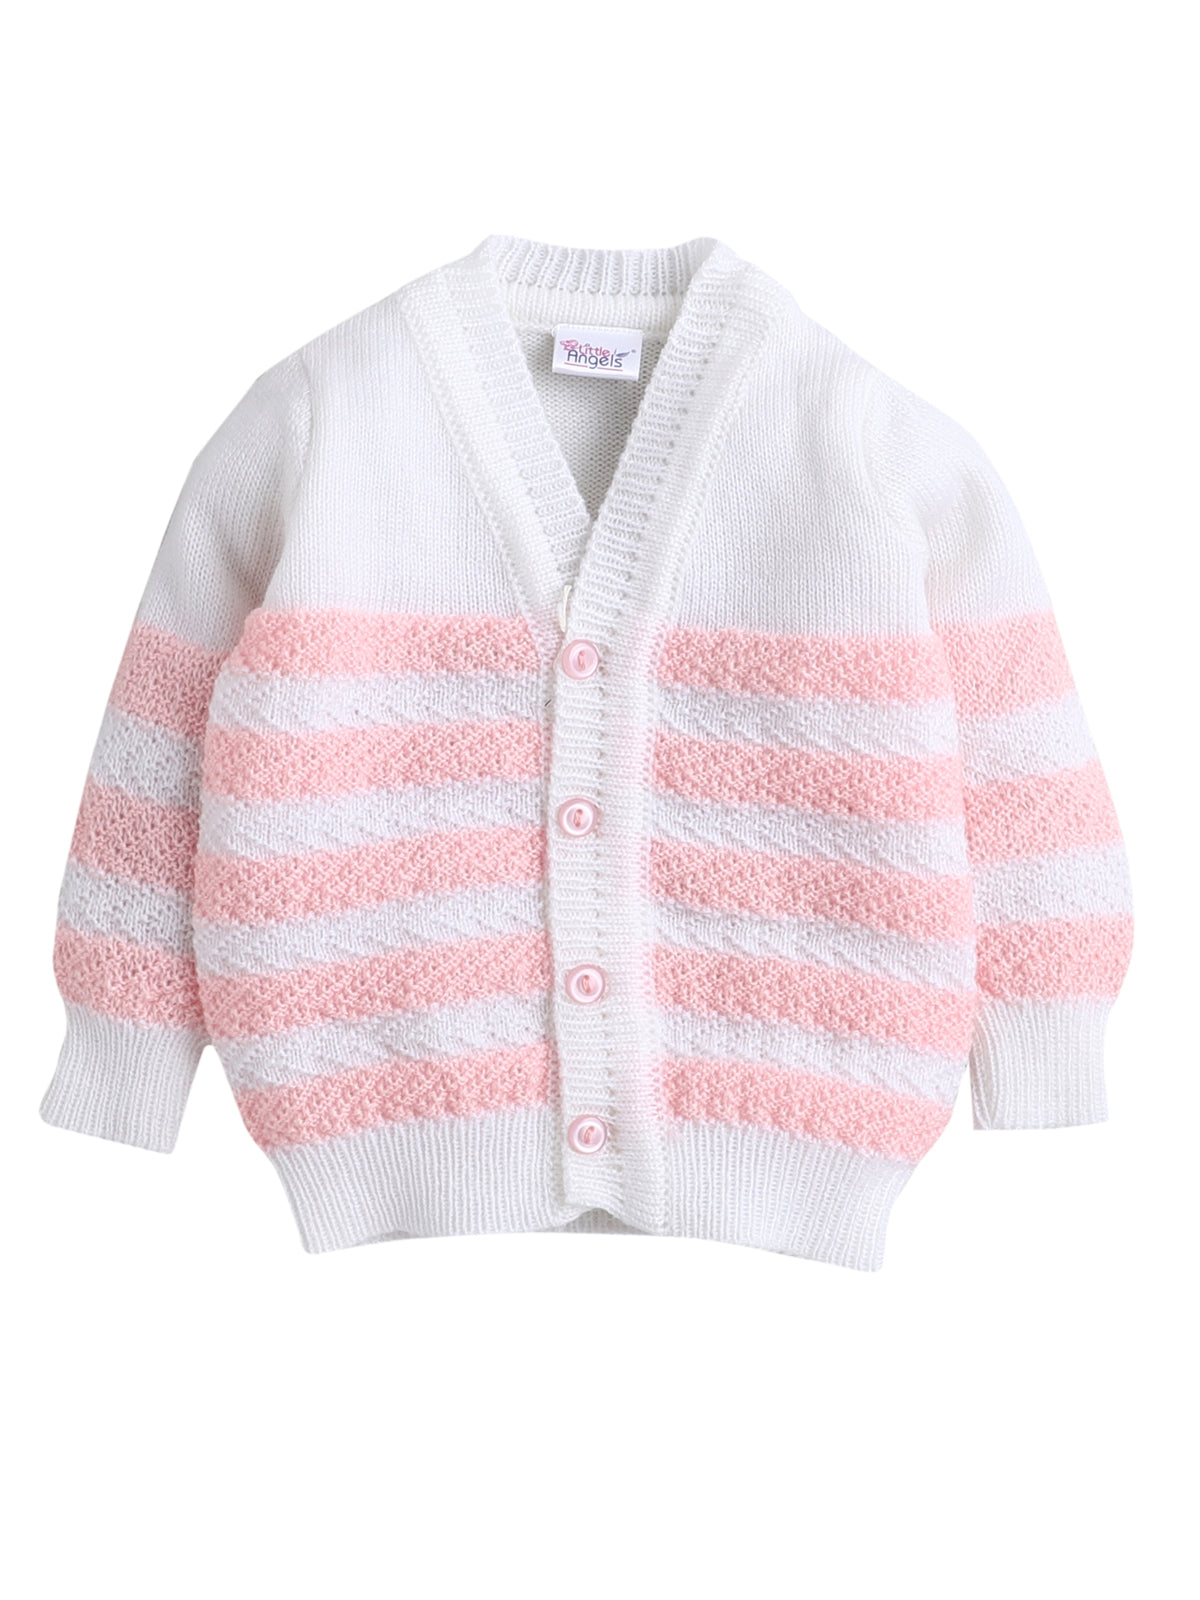 Pink Color Front Open Sweater with Matching cap and socks for baby